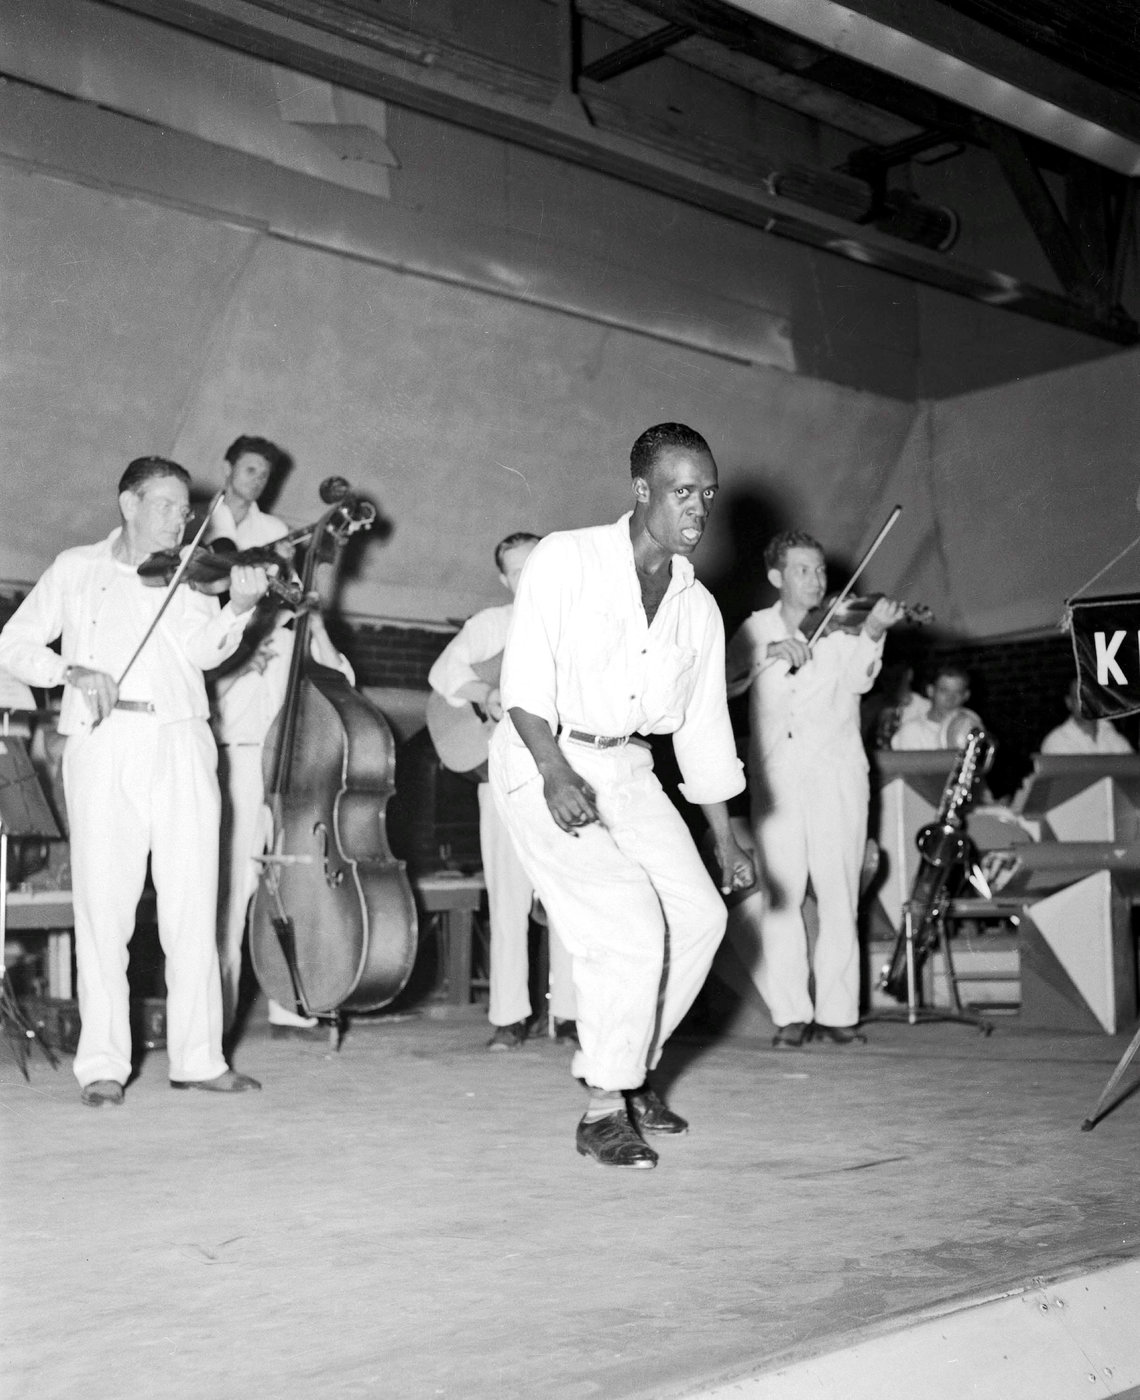 A man faces the camera while dancing in front of a group of musicians playing instruments. 